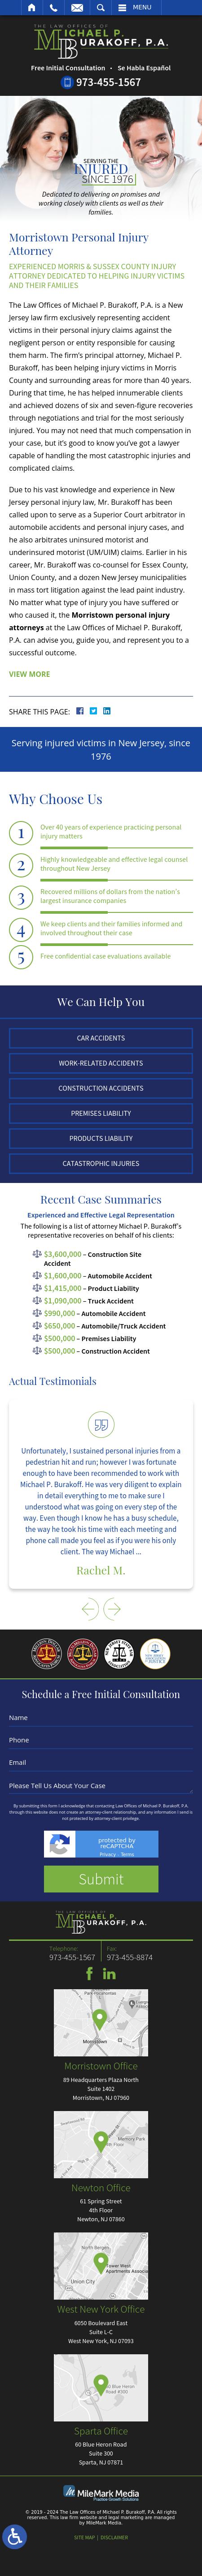 Law Offices of Michael P. Burakoff, P.A. - Newton NJ Lawyers